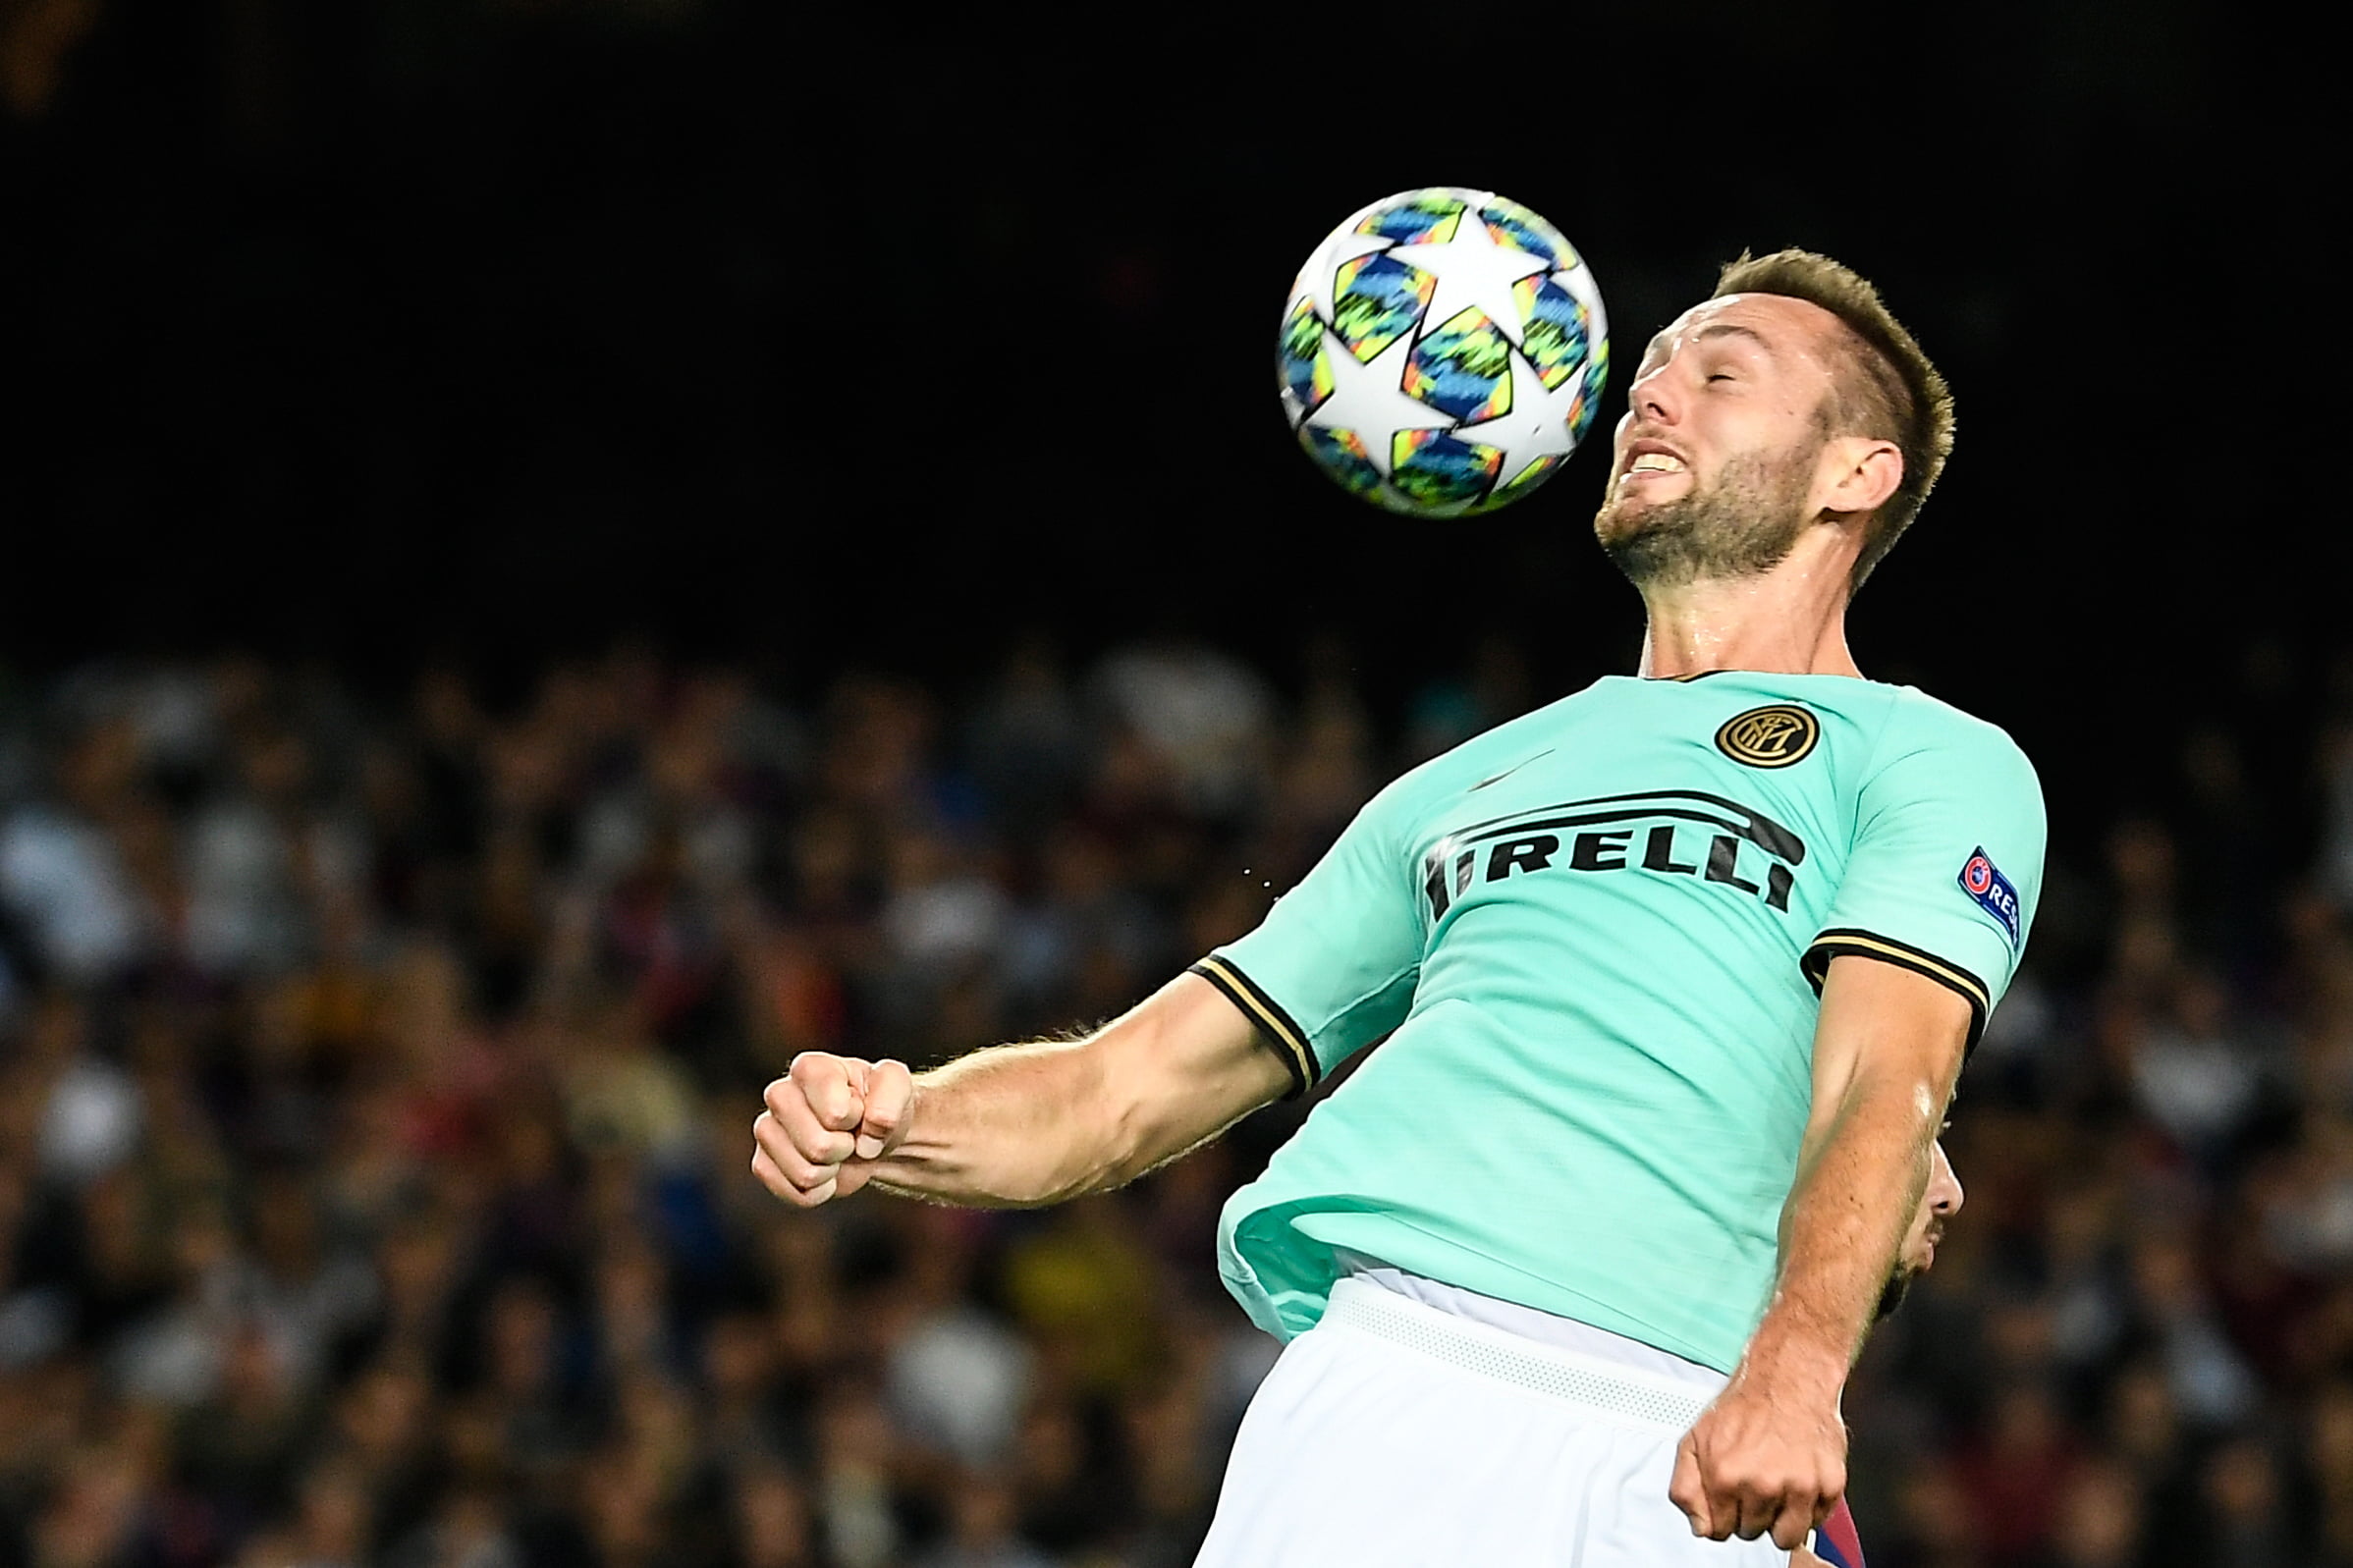 Inter Milan's Slovak defender Milan Skriniar heads the ball during the UEFA Champions League Group F football match between Barcelona and Inter Milan at the Camp Nou stadium in Barcelona, on October 2, 2019. (Photo by LLUIS GENE/AFP via Getty Images)